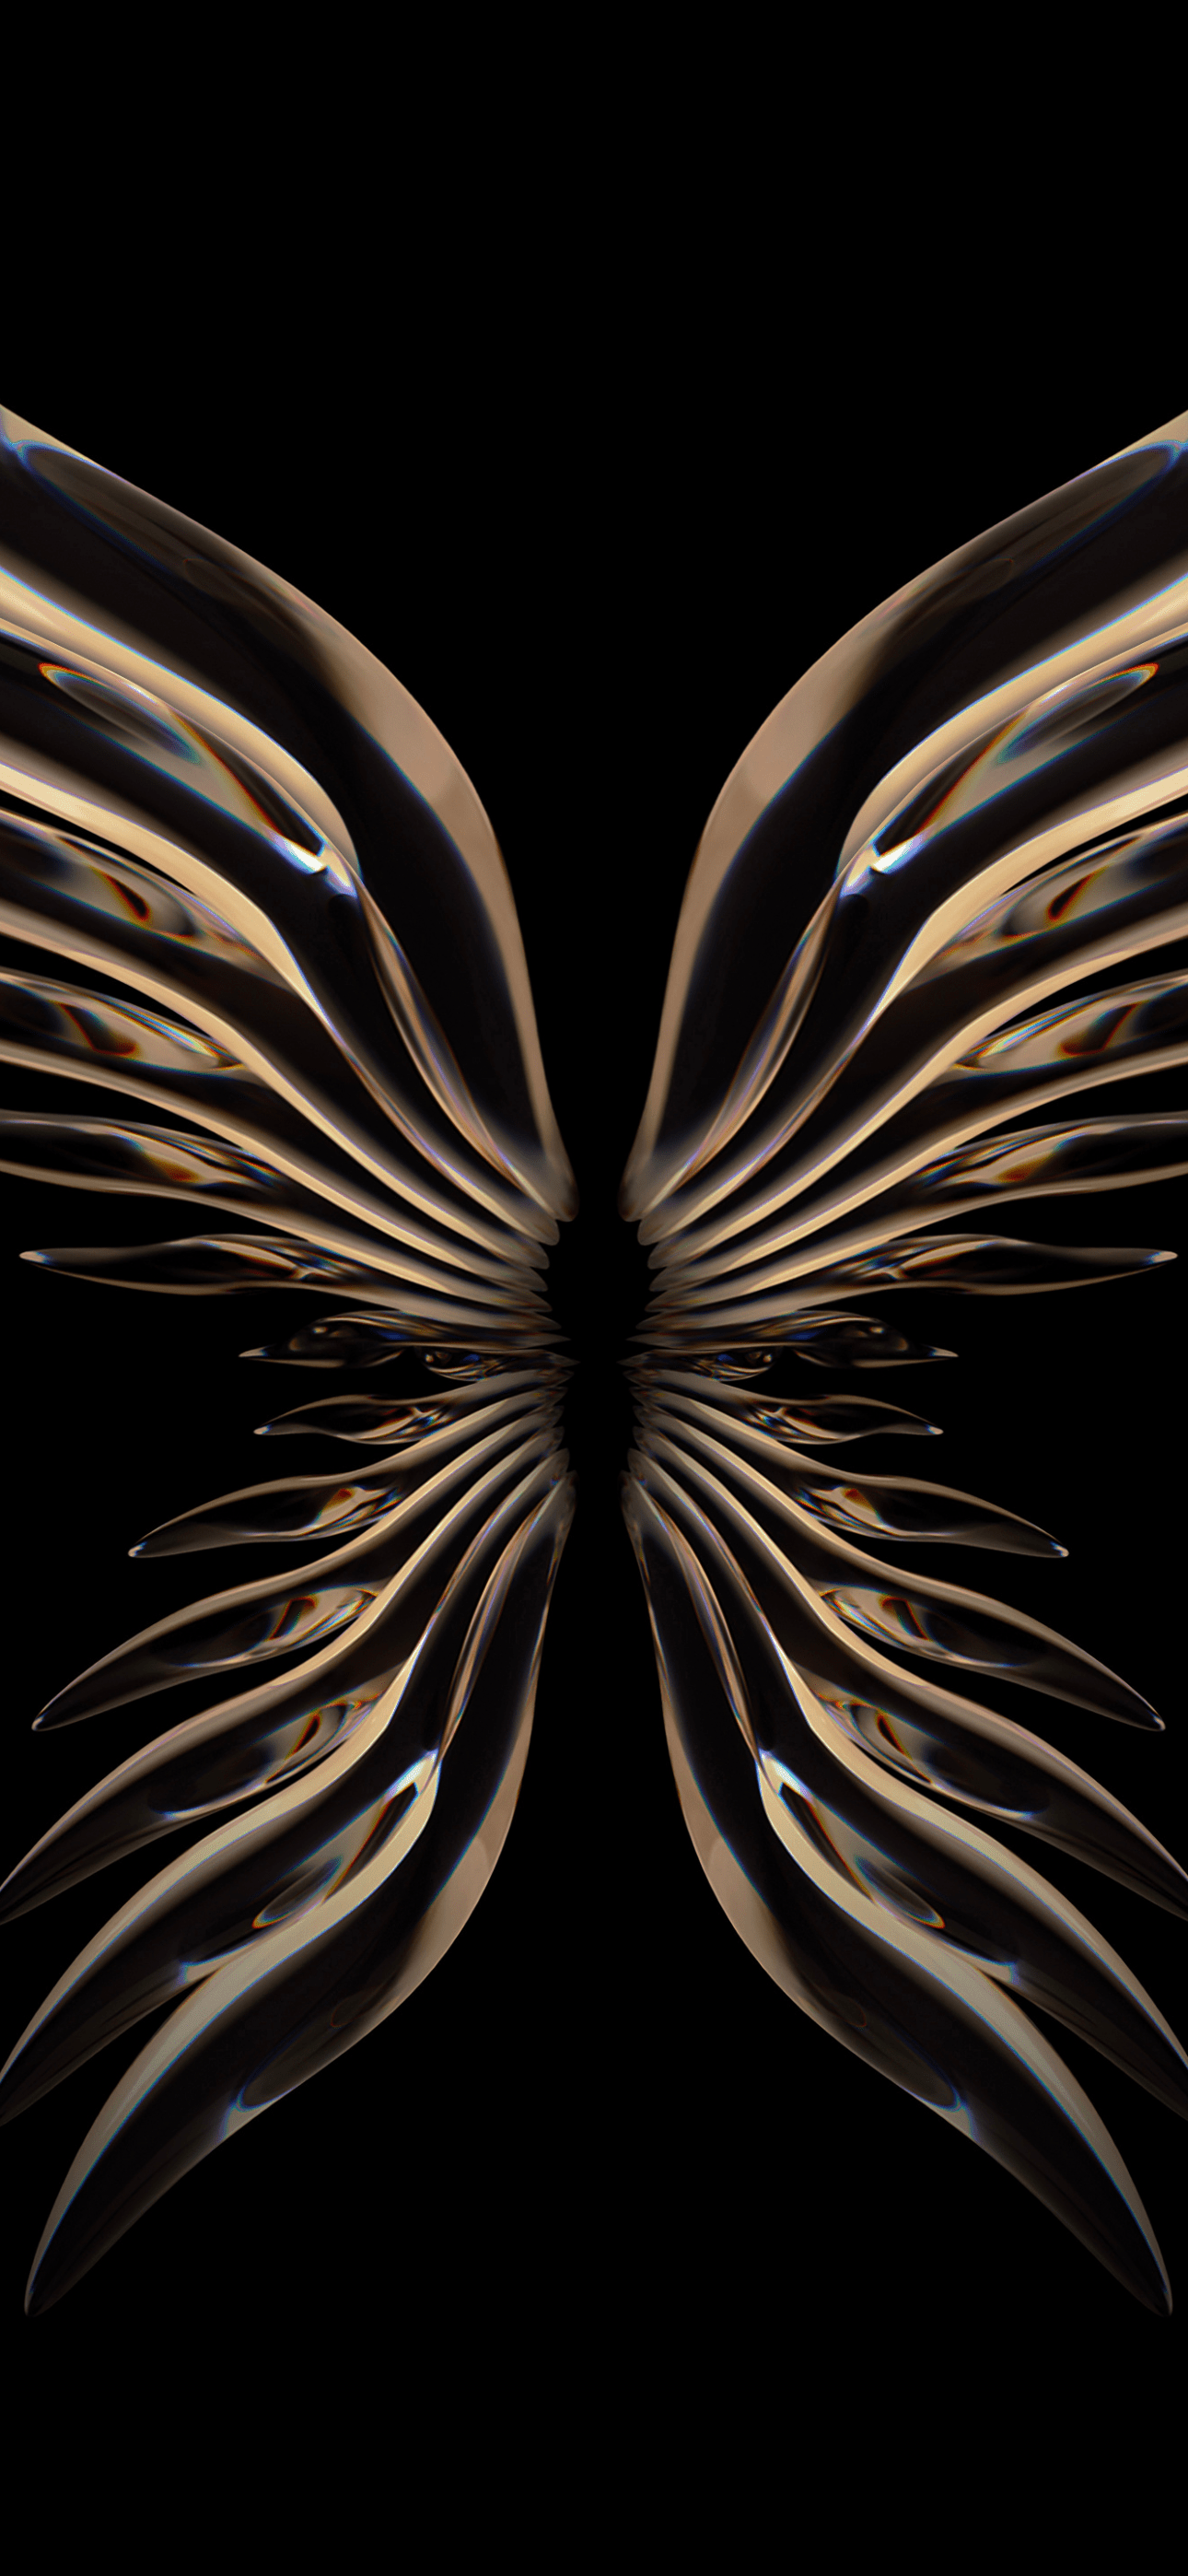 A pair of golden wings on a black background - Wings